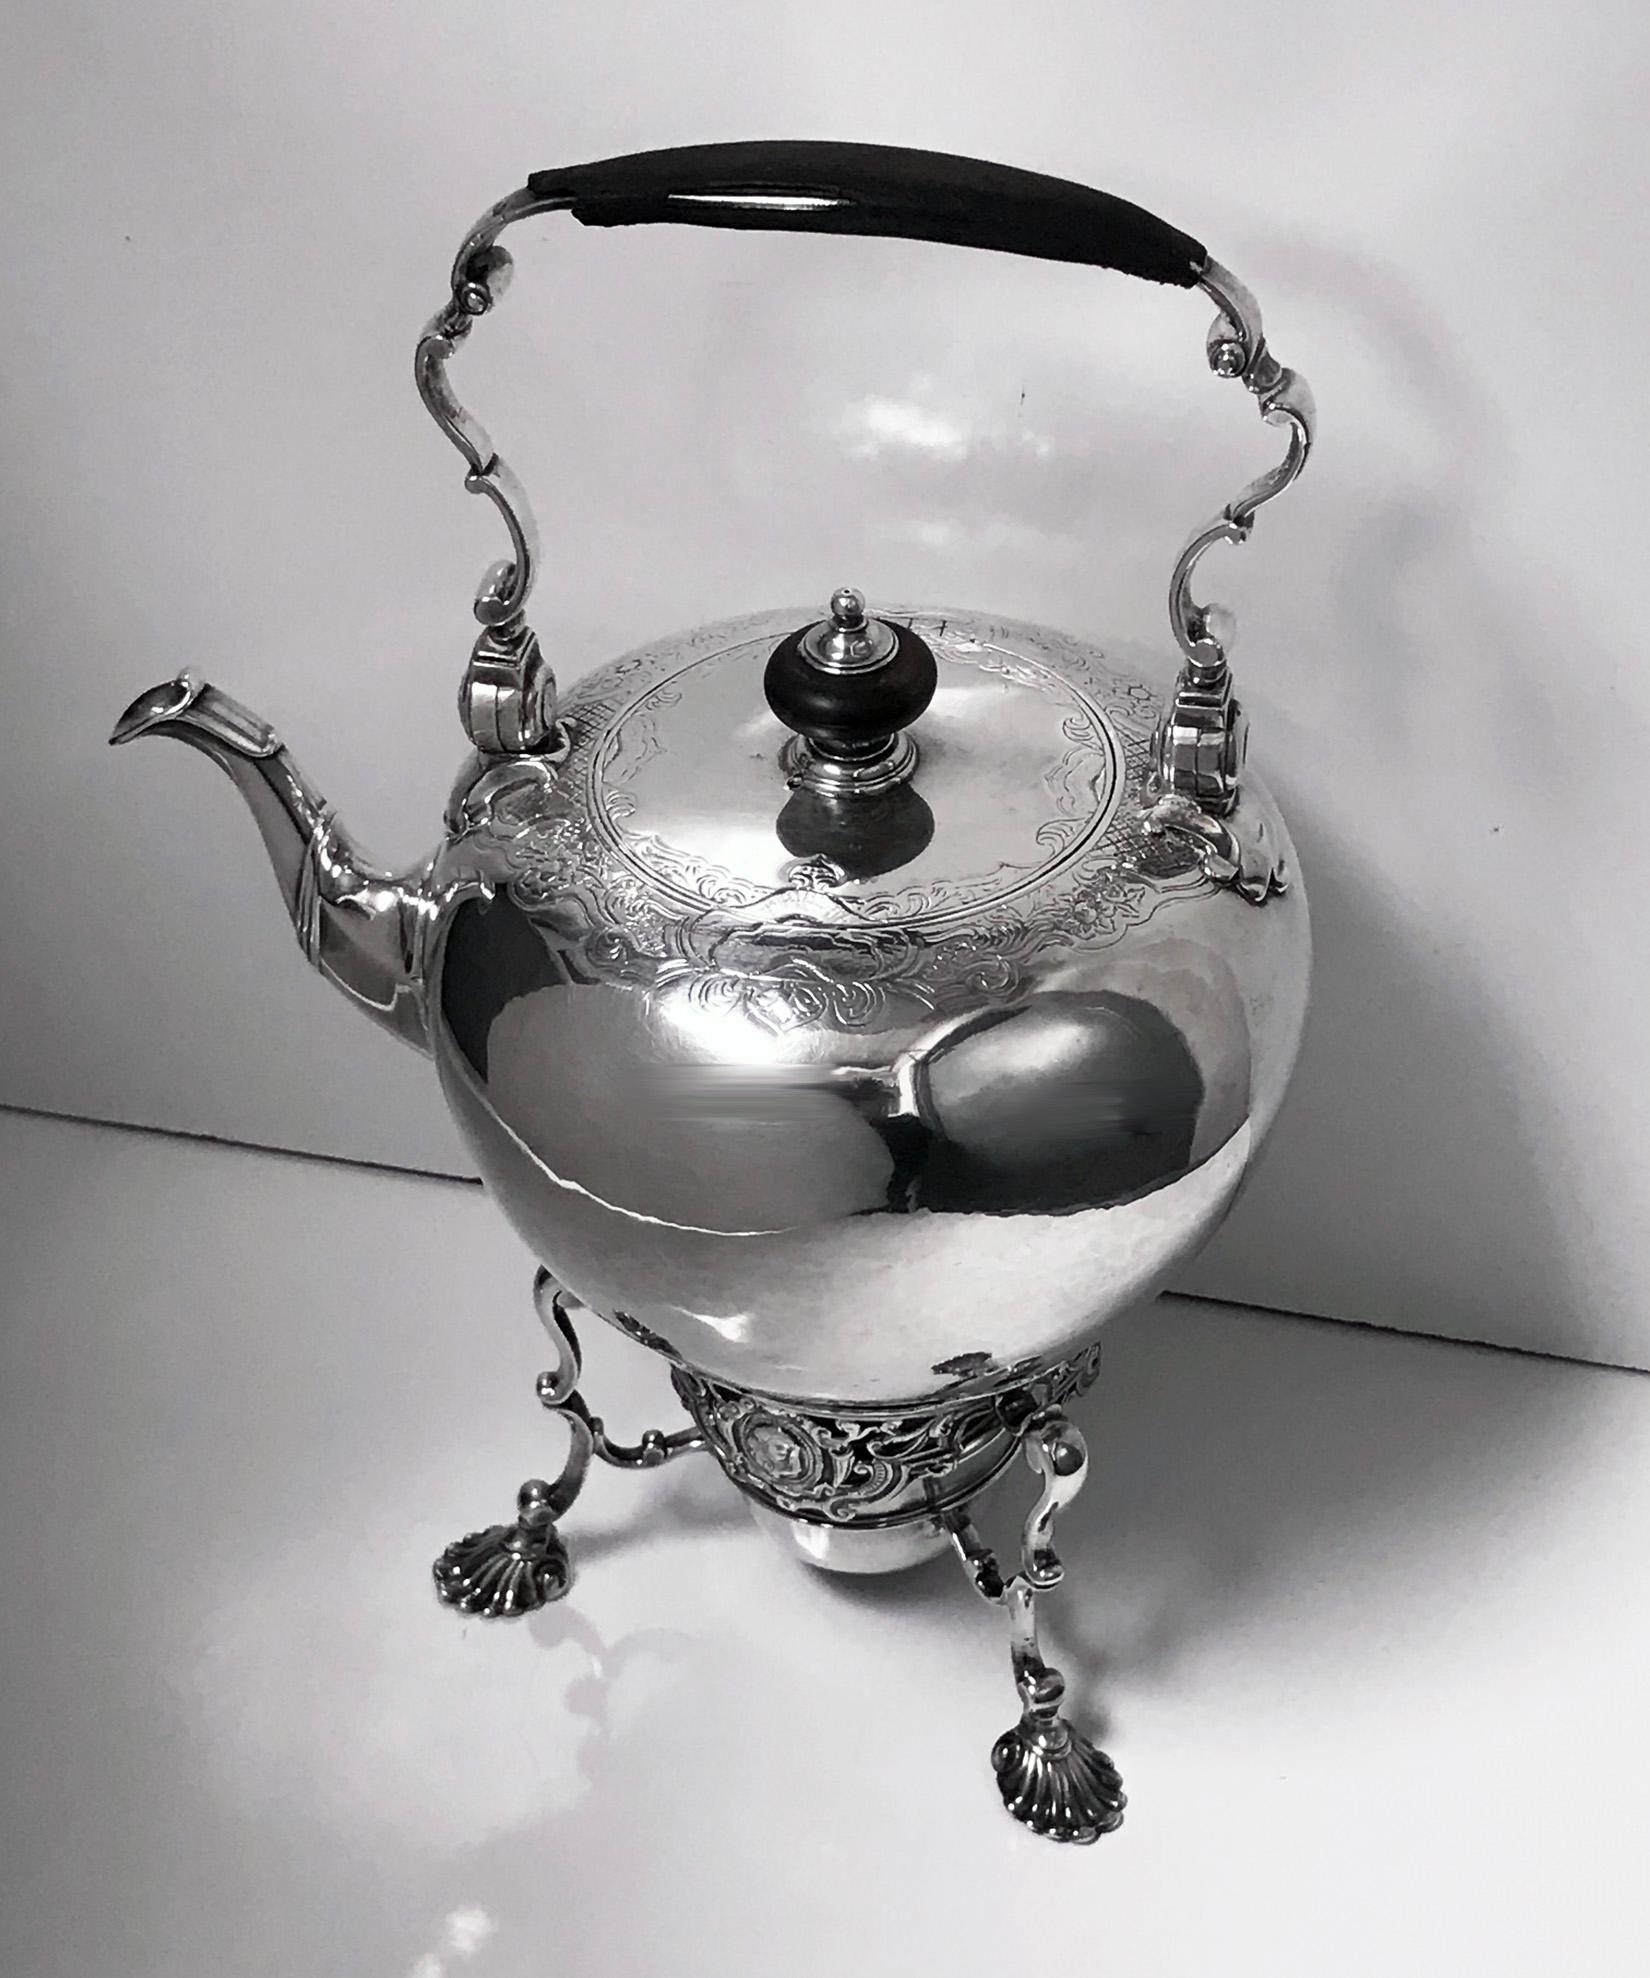 George 11 silver Kettle on stand, London 1736 Richard Gurney and Thomas Cook. Large bullet shape Kettle with flat chased decorative border on tri form on shell knuckle support stand, pierced frieze with face masks surround with burner, leather clad